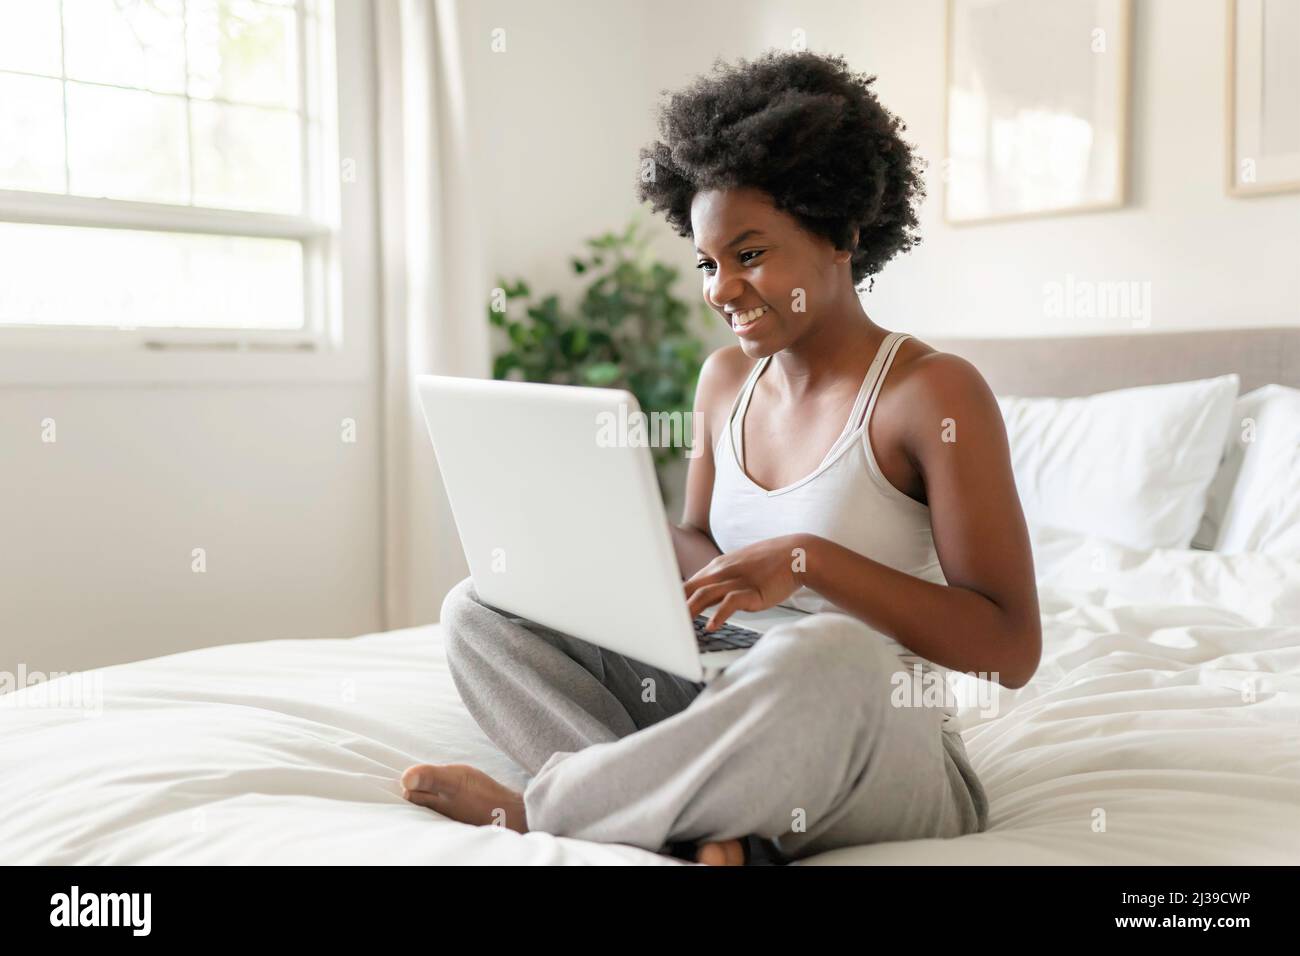 Women in Sporty Pajamas Sit or Chat Online with Friends or Shopping Online.  Stock Photo - Image of computer, female: 145925022